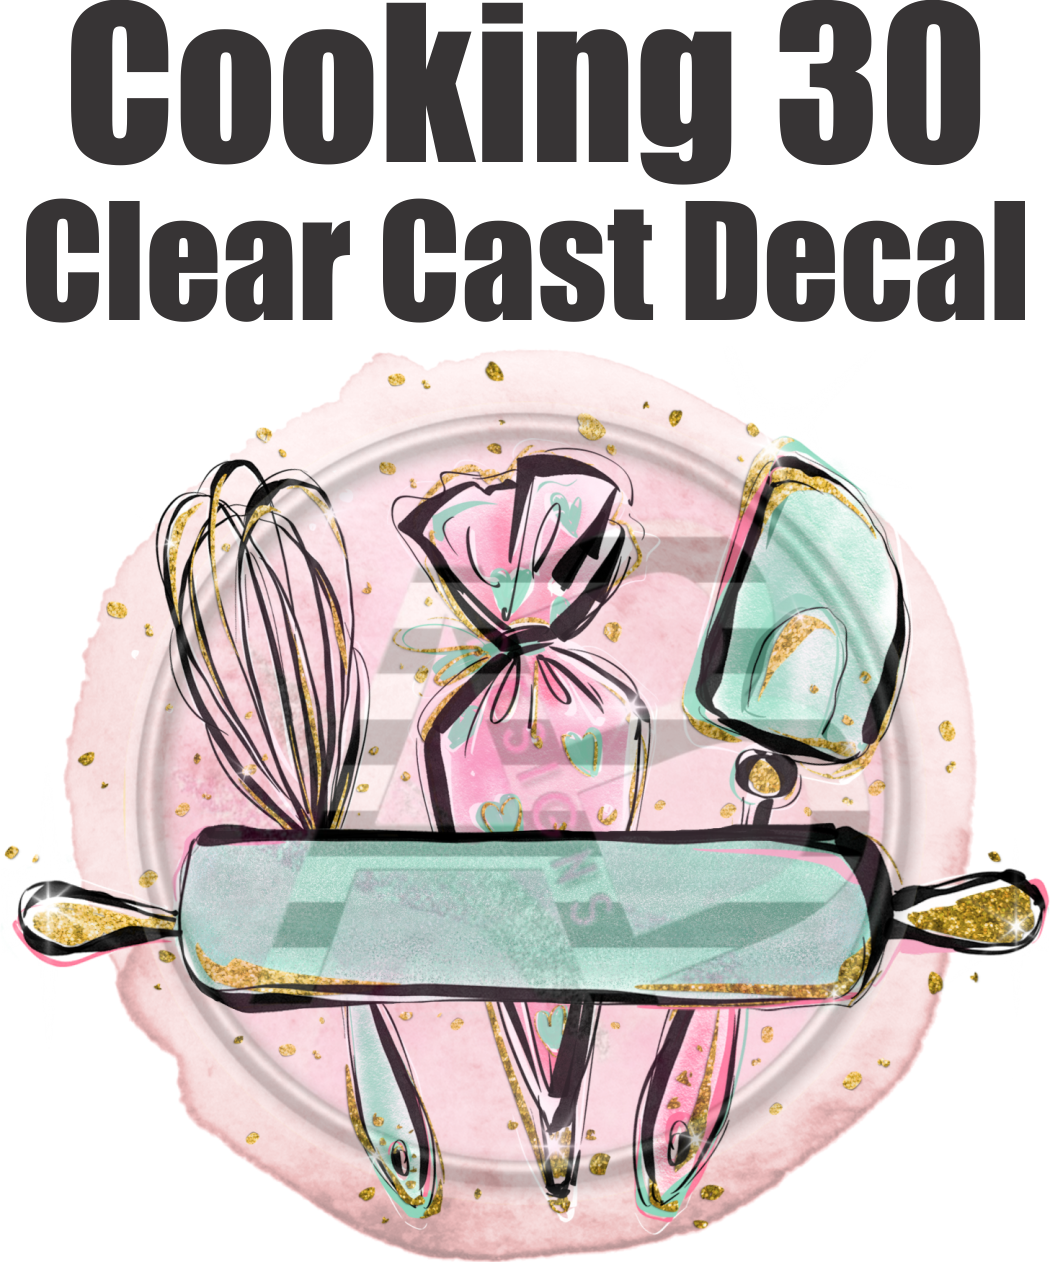 Cooking 30 - Clear Cast Decal - 178